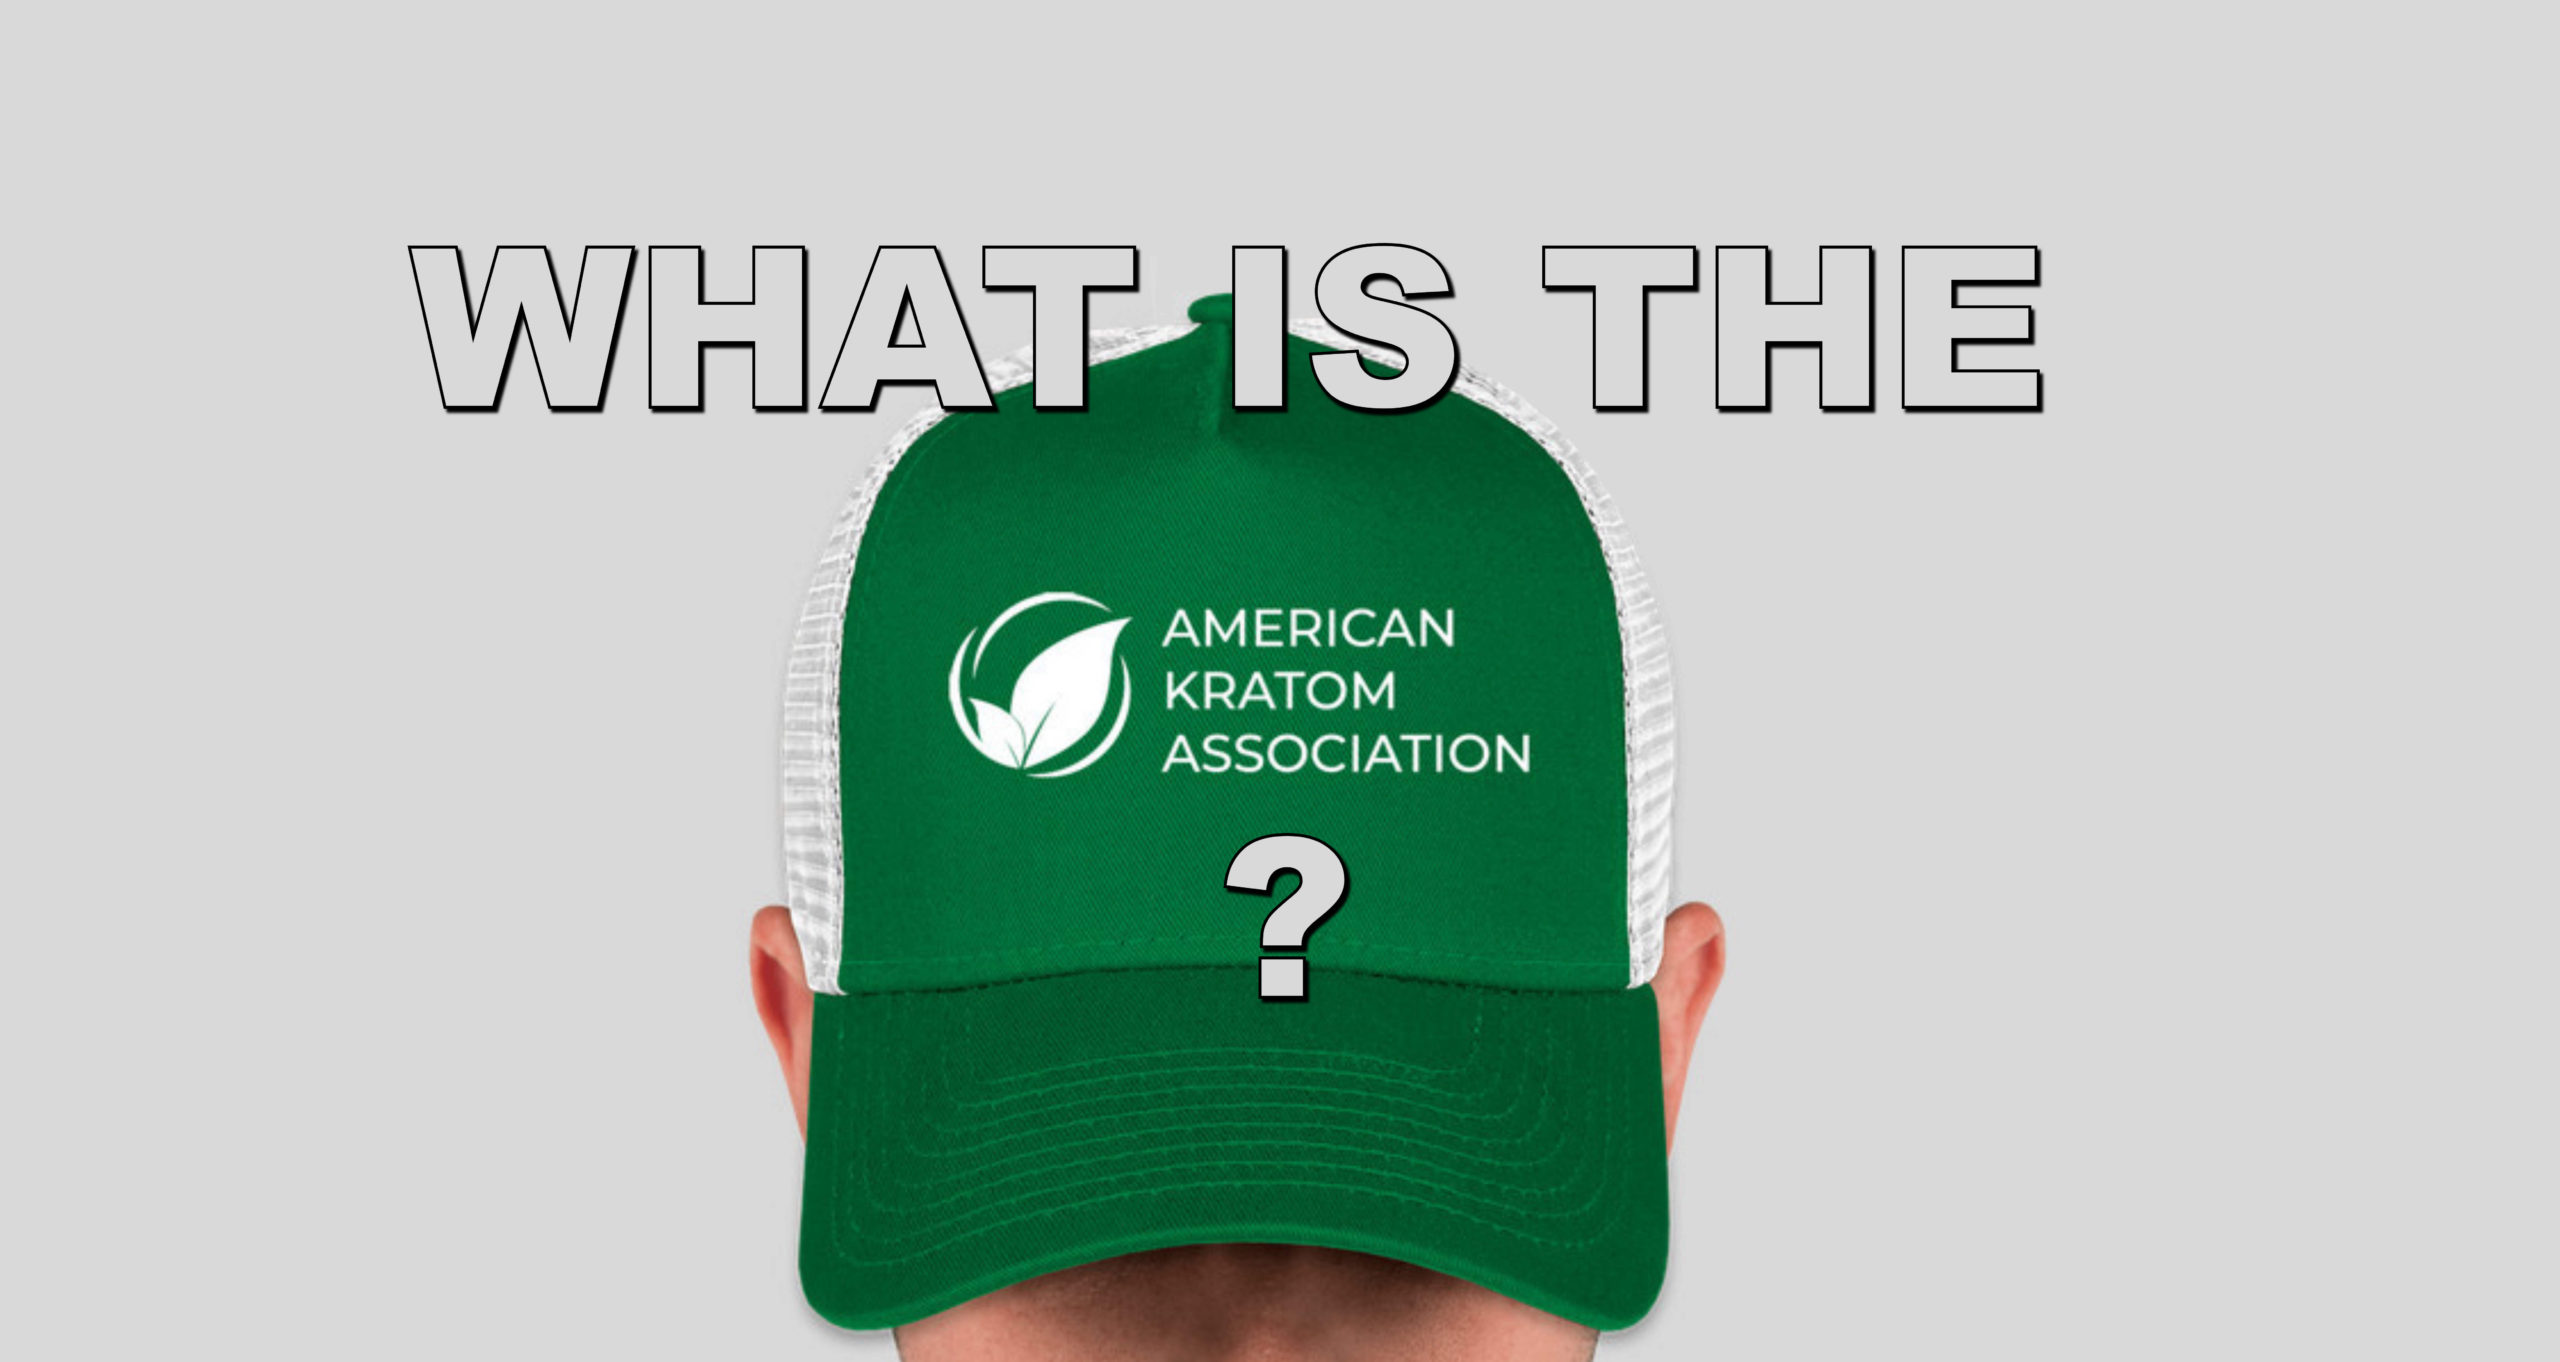 You are currently viewing What is the American Kratom Association?